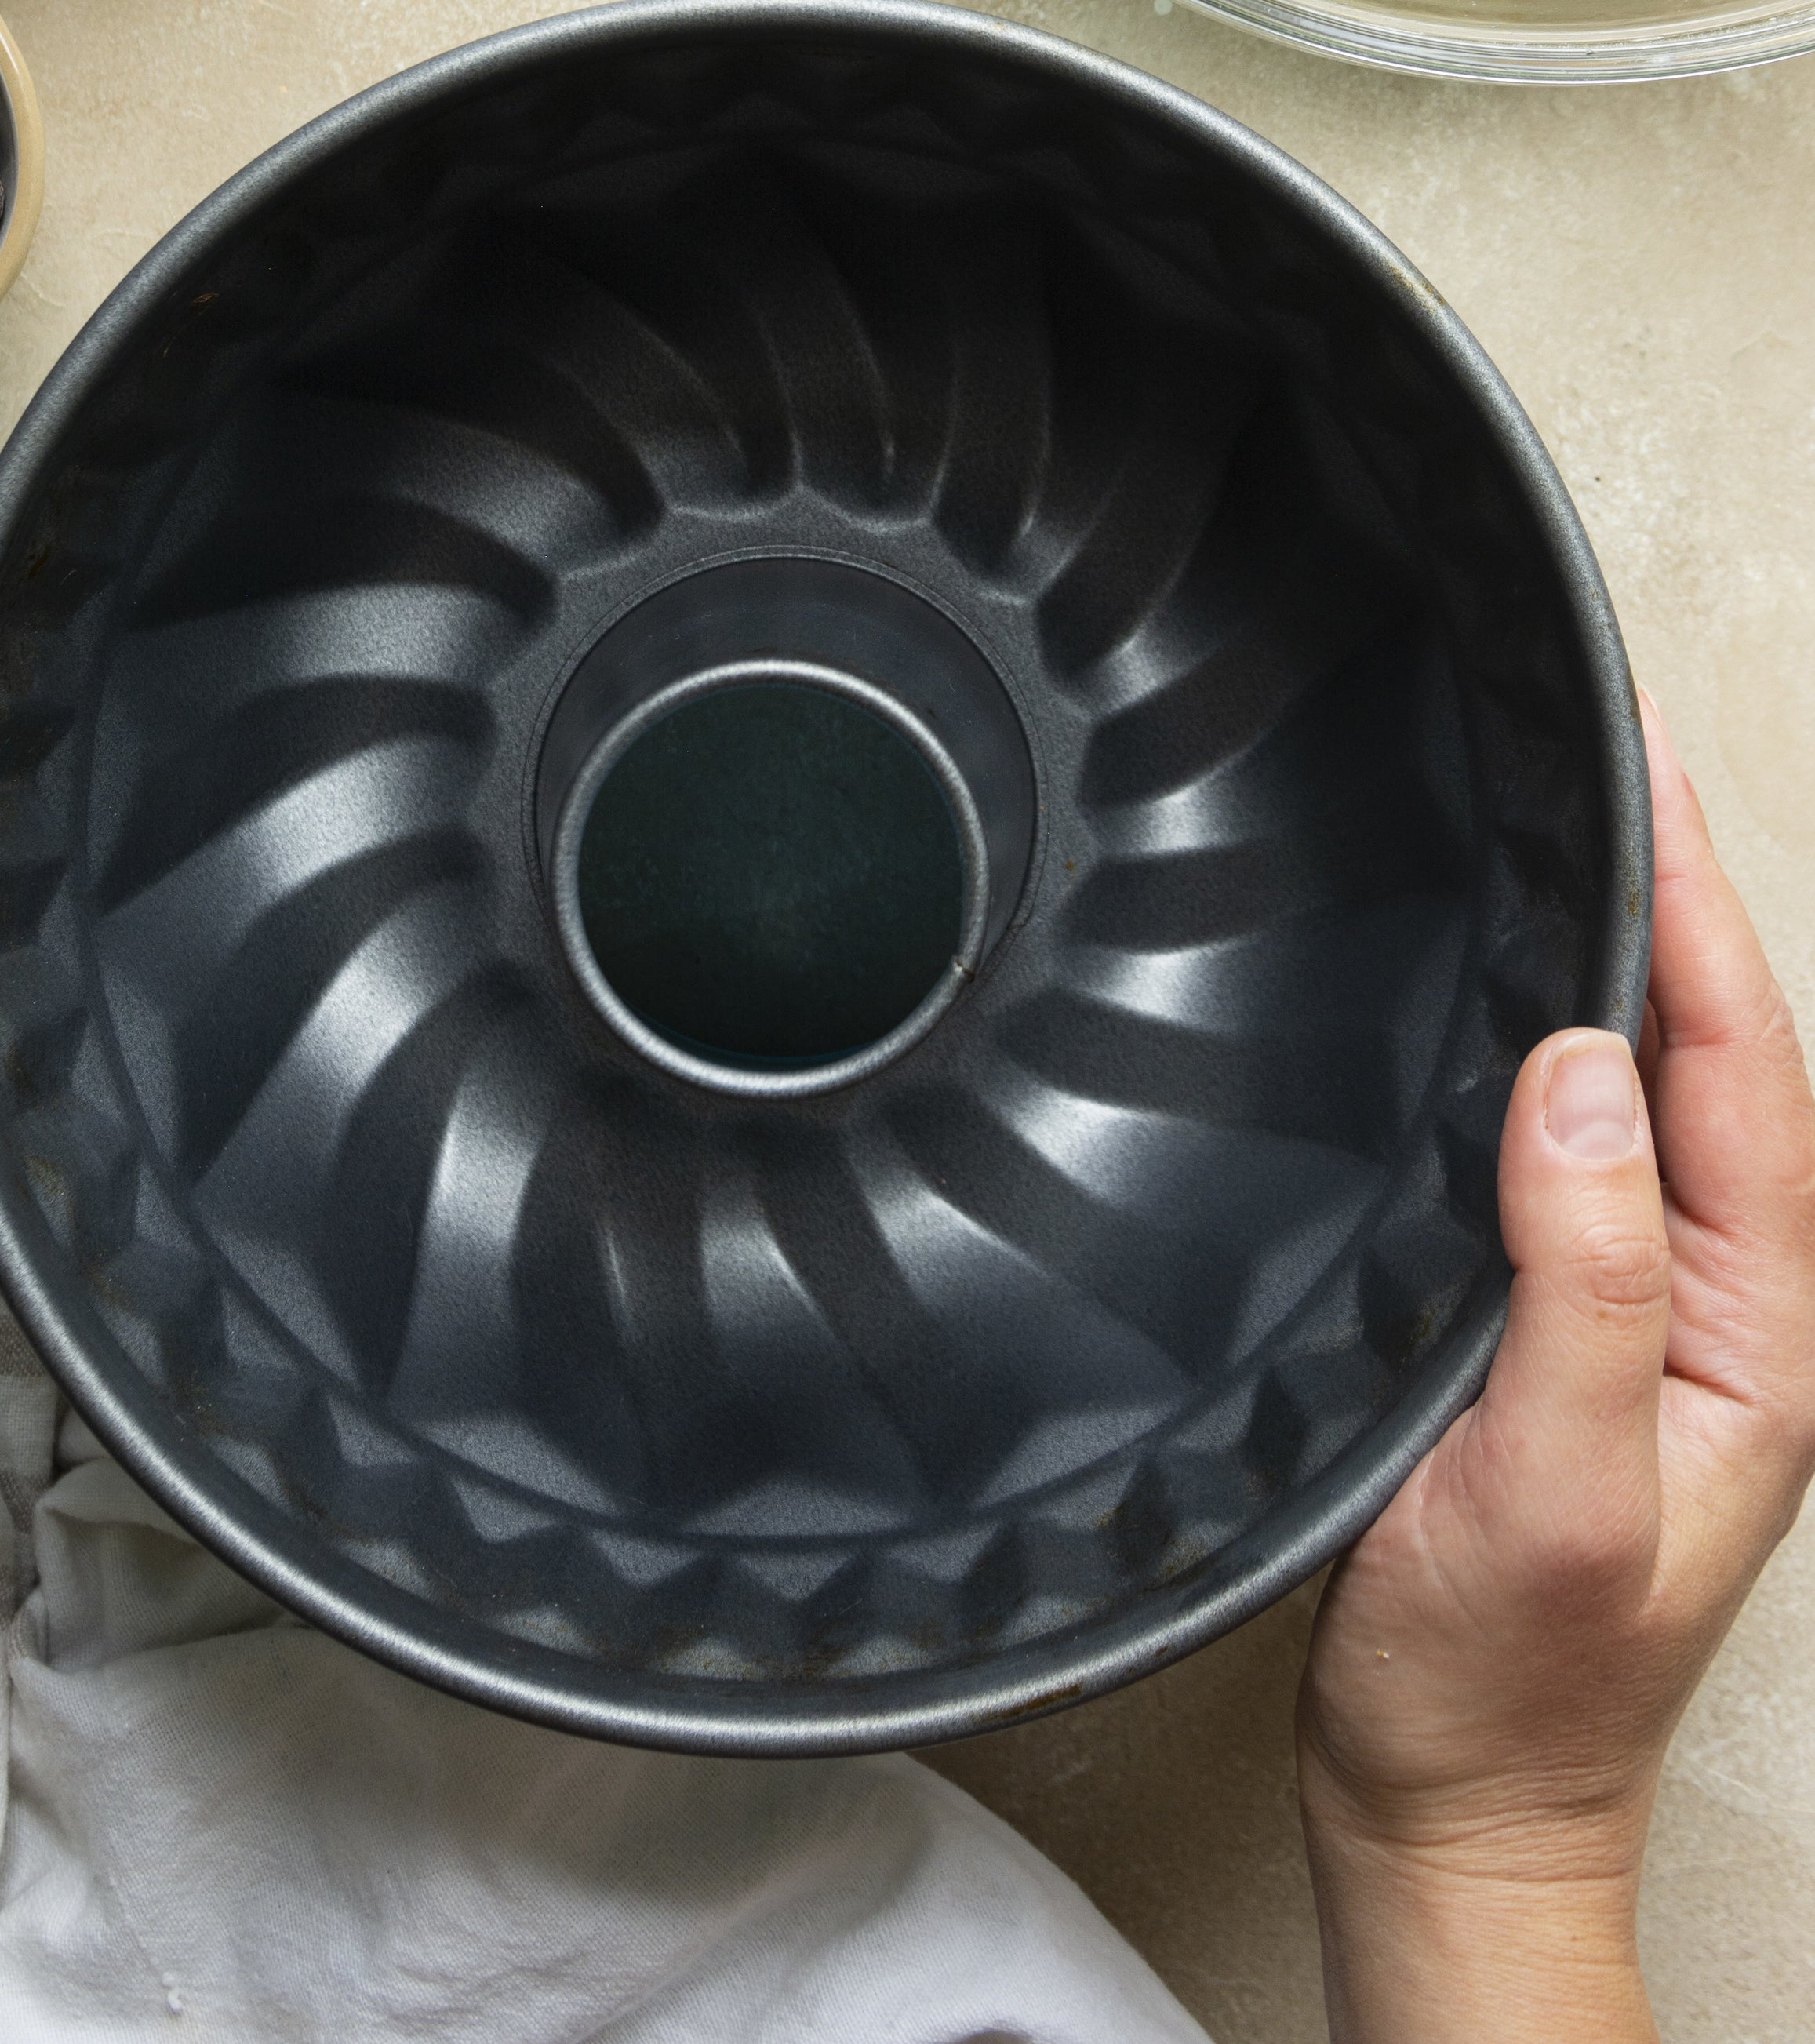 Person holding a Bundt pan in the kitchen